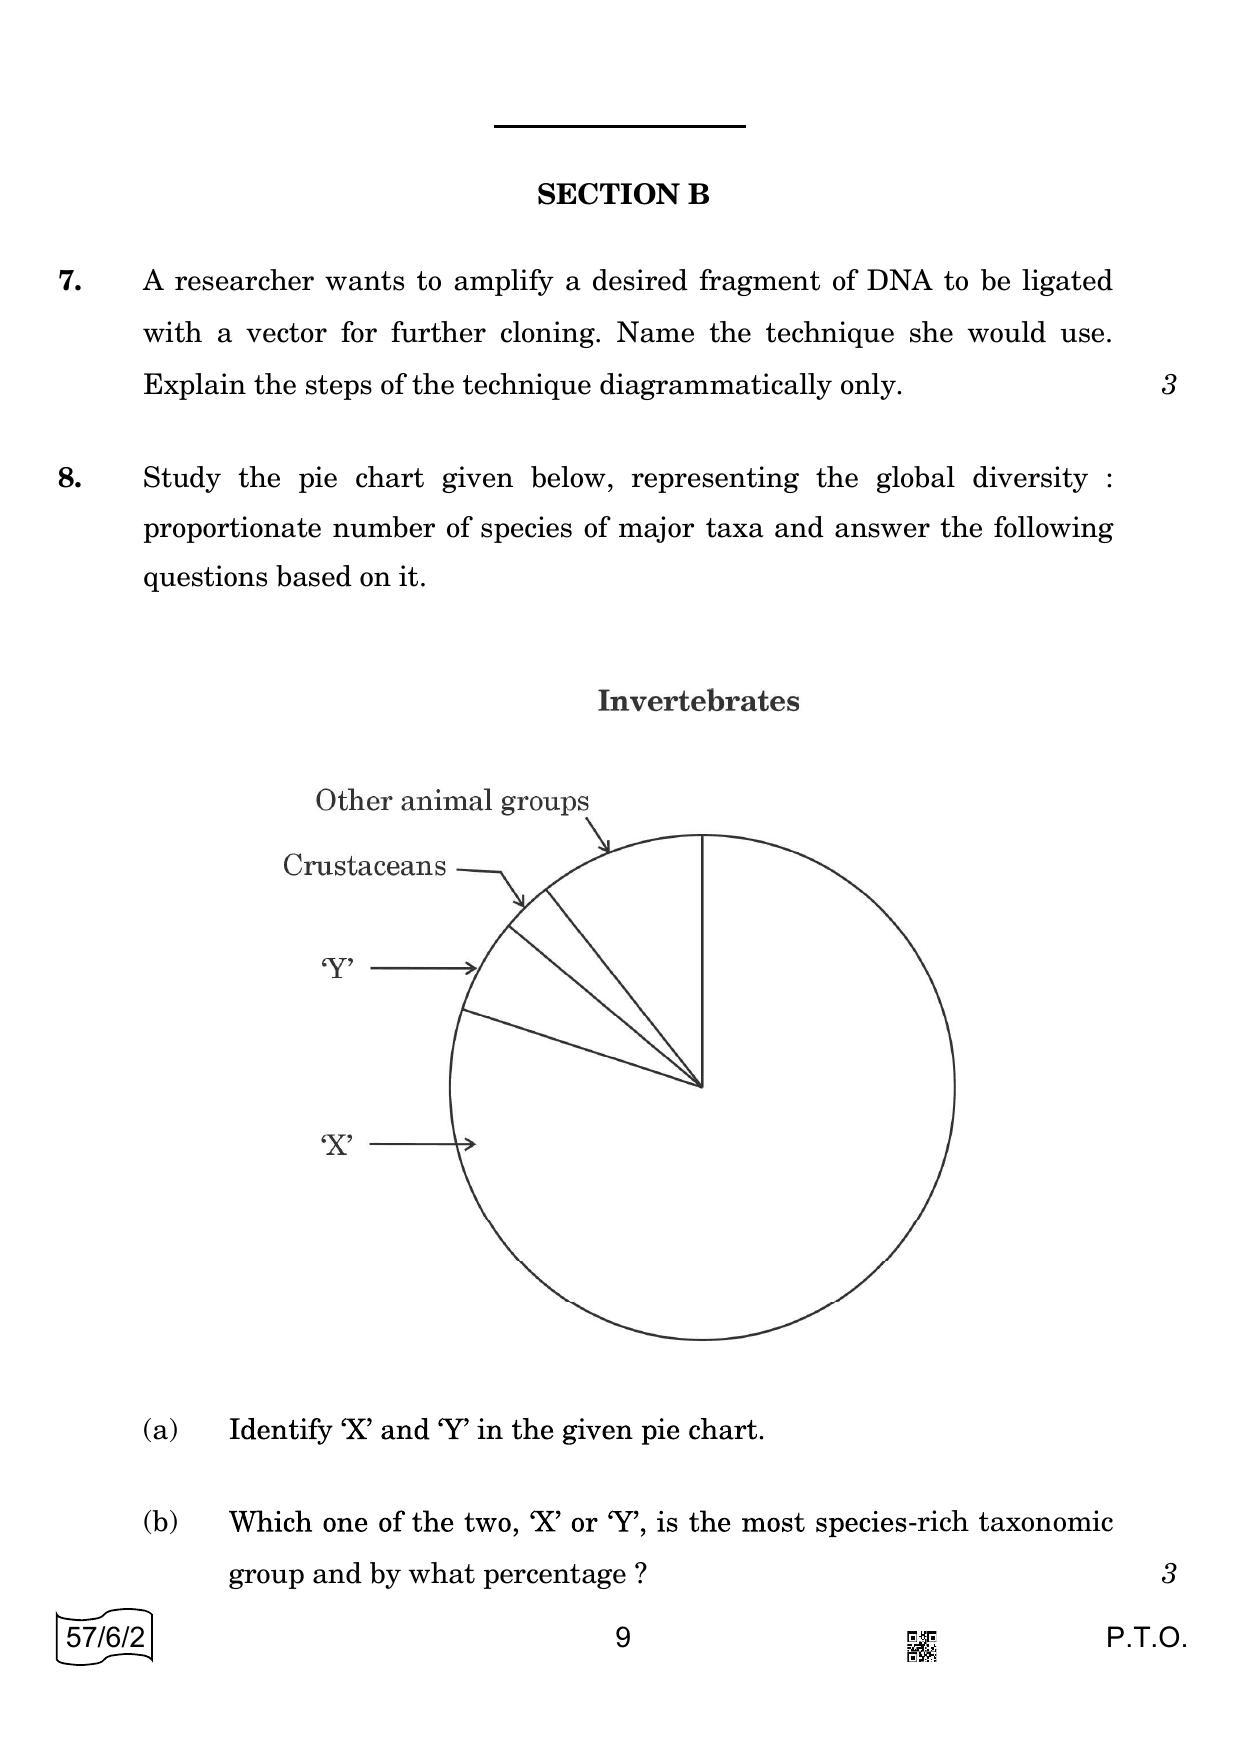 CBSE Class 12 57-6-2 BIOLOGY 2022 Compartment Question Paper - Page 9